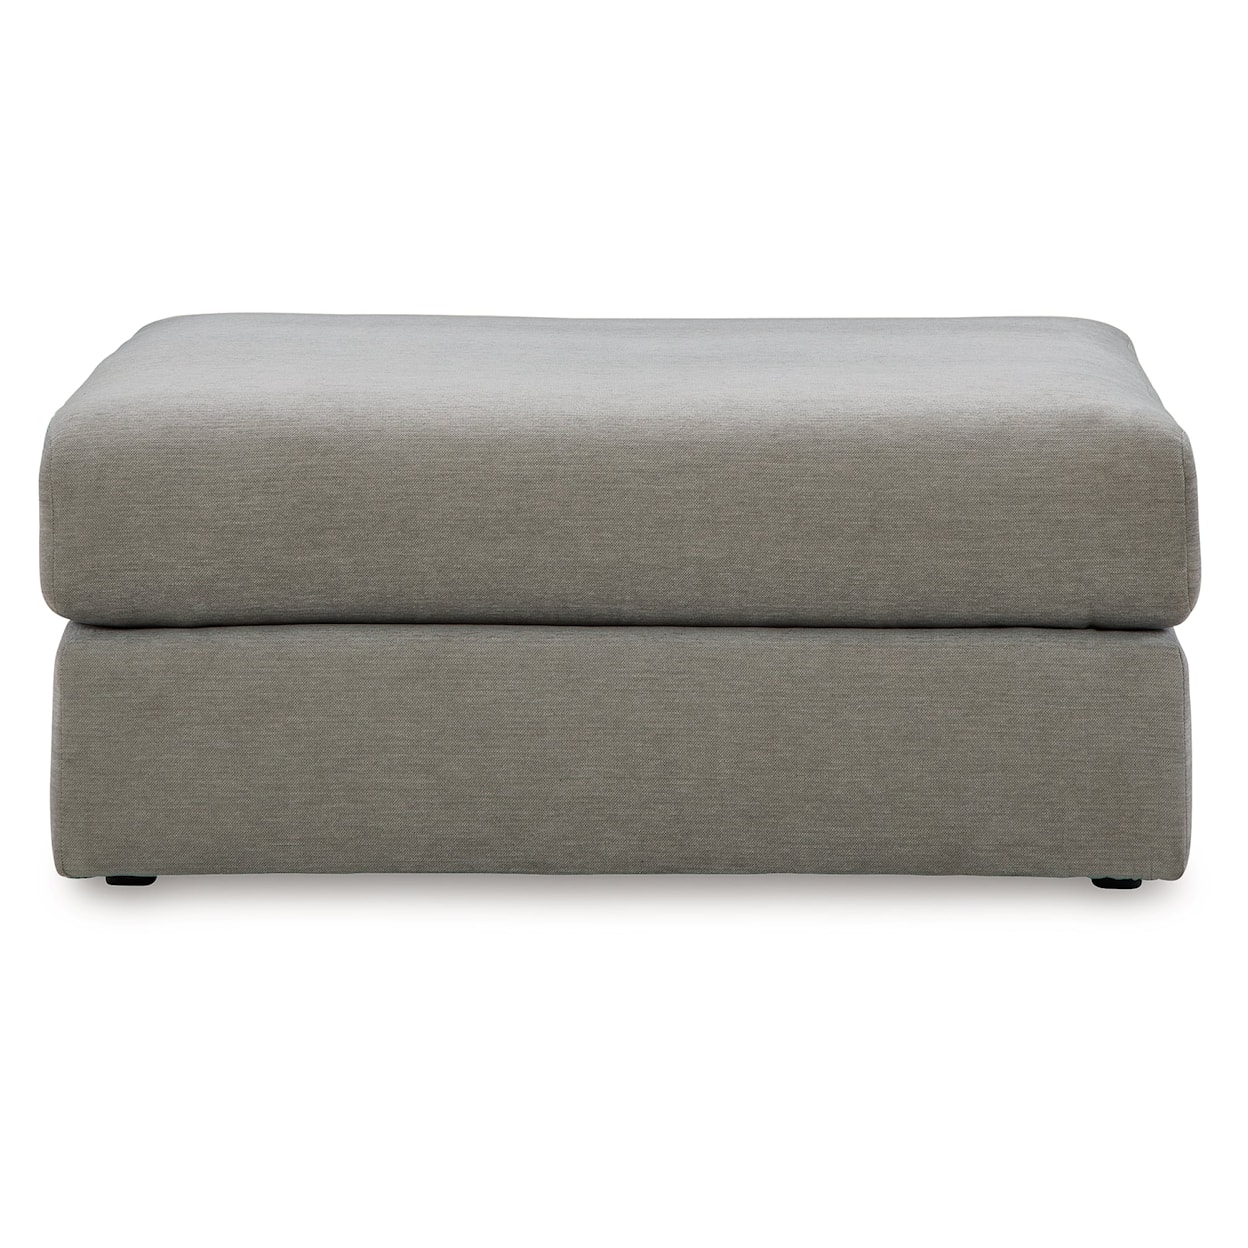 Signature Design by Ashley Avaliyah Oversized Accent Ottoman